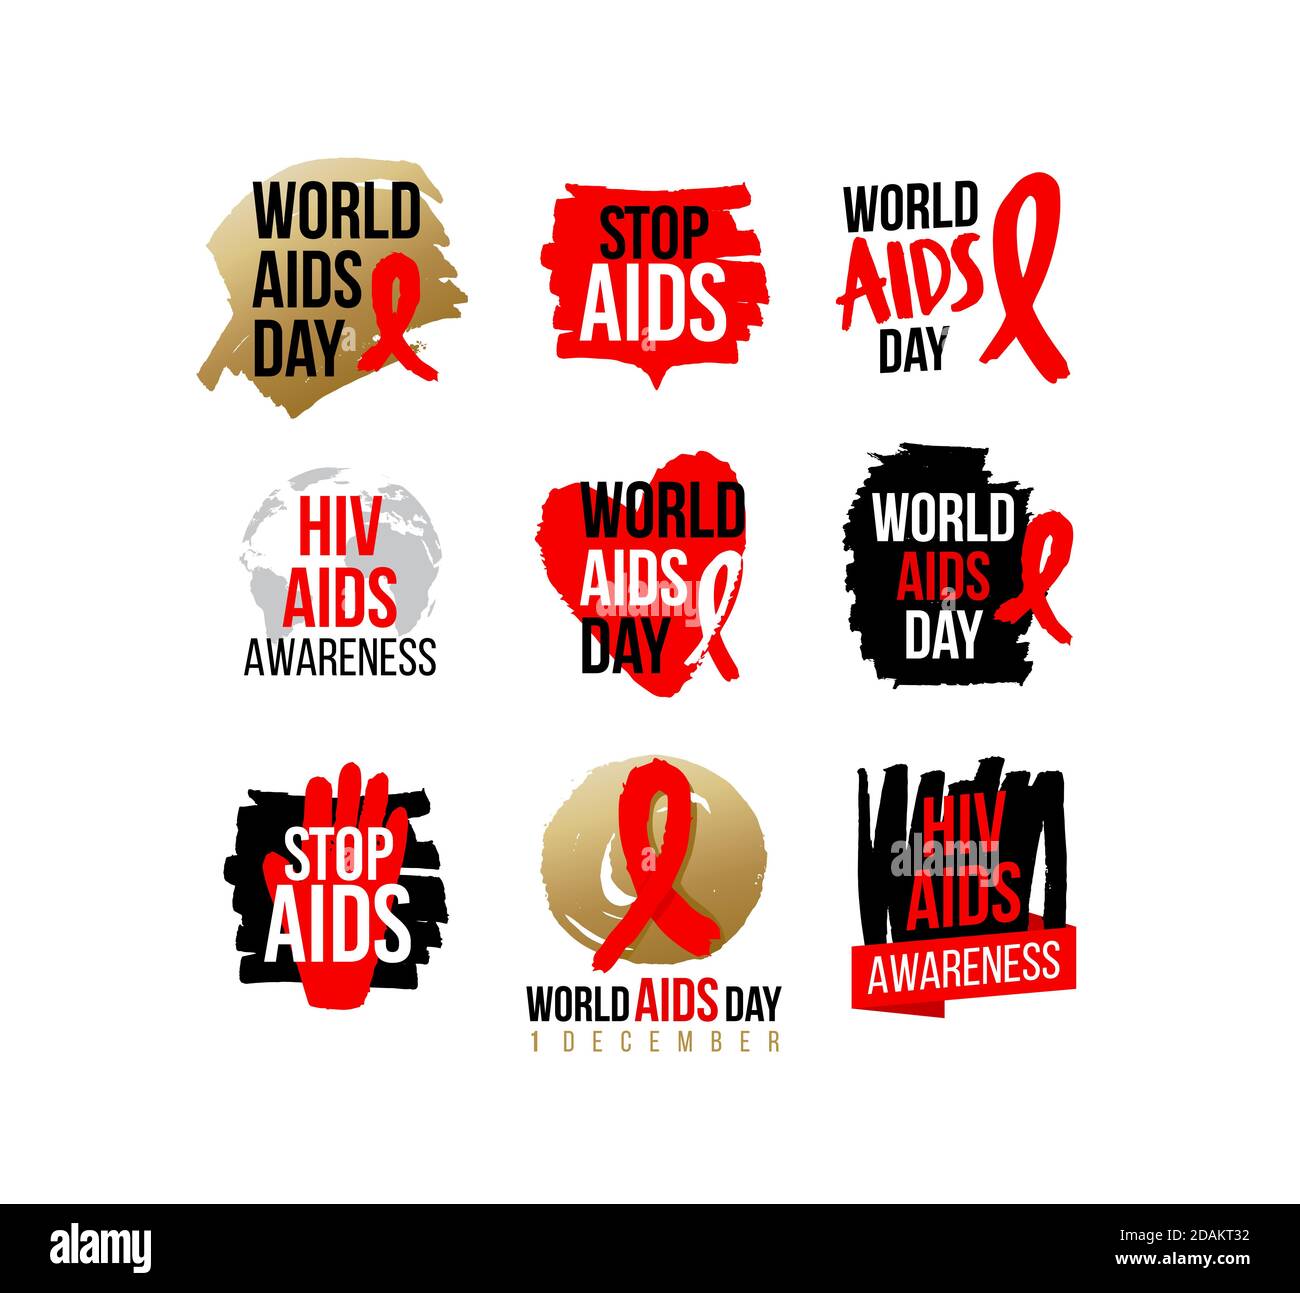 Aids and Hiv Awareness Red Ribbon. WORLD AIDS DAY CAMPAIGNS icon, badges, sticker, label, tag design for advertising campaign. Stop Aids. 1 December Stock Vector